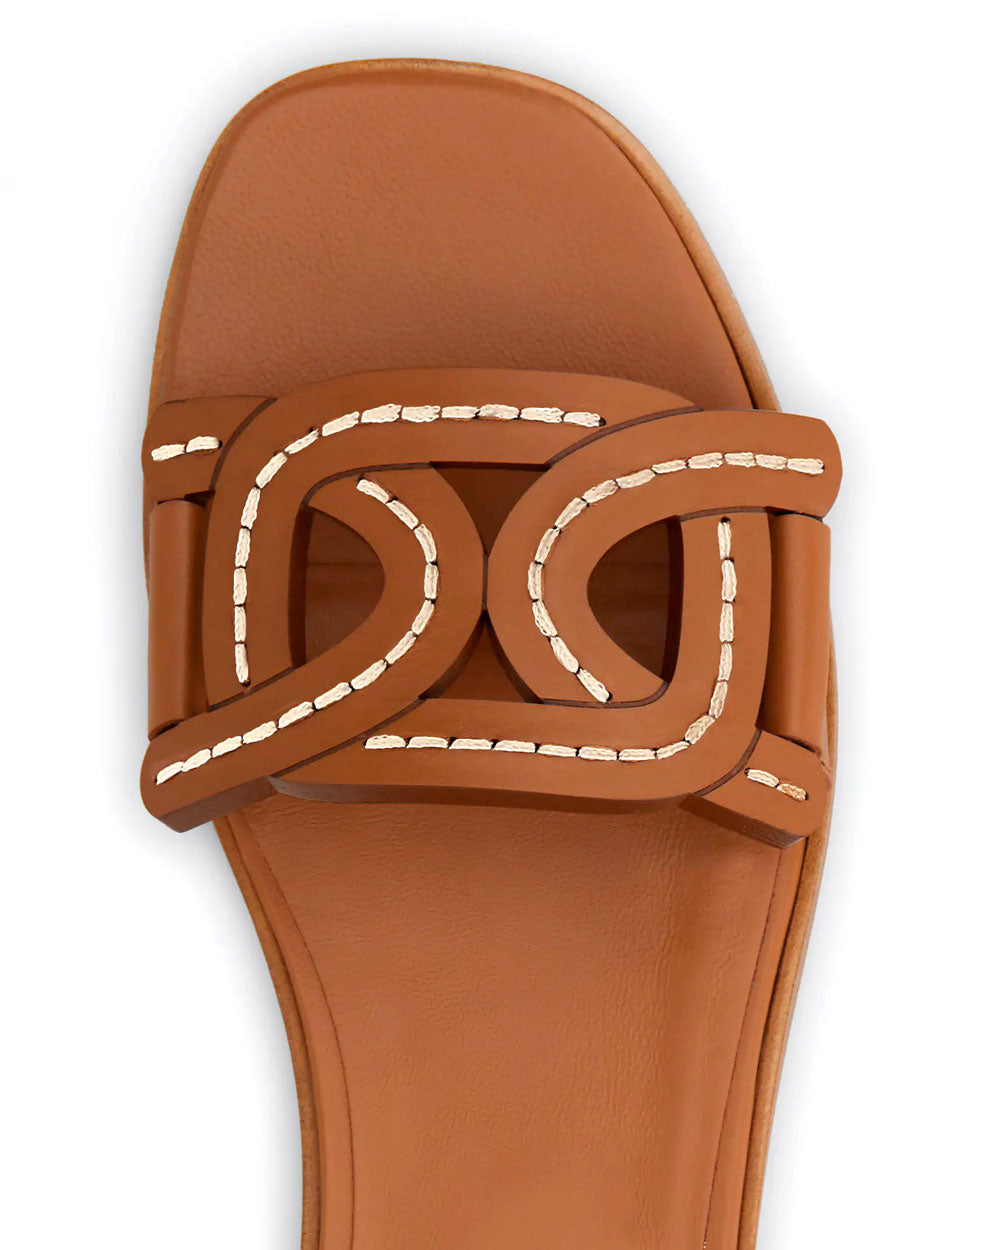 Woven Effect Leather Sandal in Tan